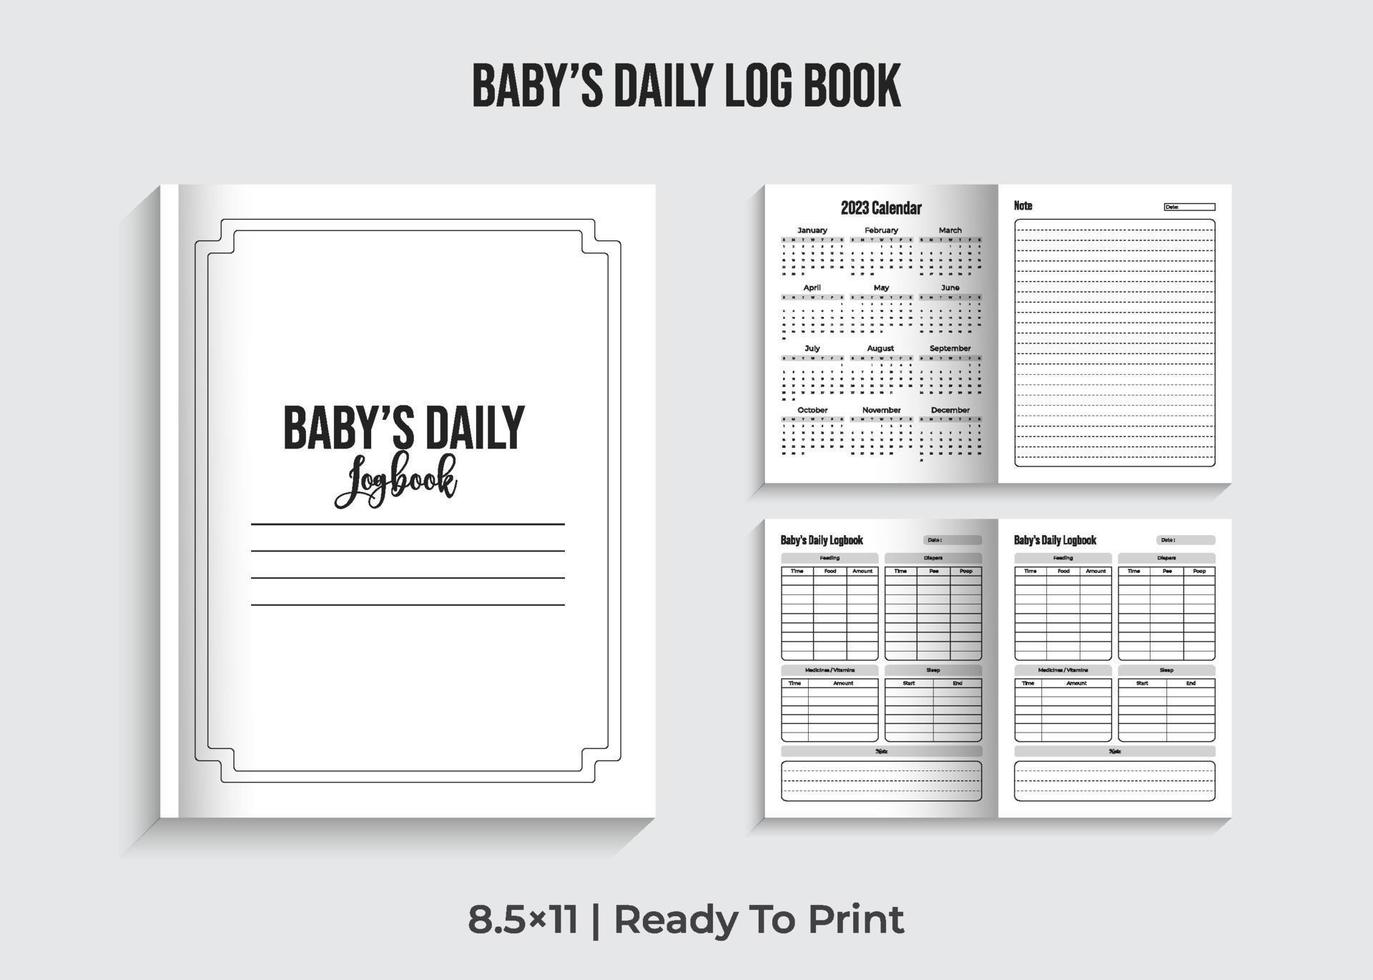 Baby's Daily Log Book, Daily Log For Baby Pro download vector